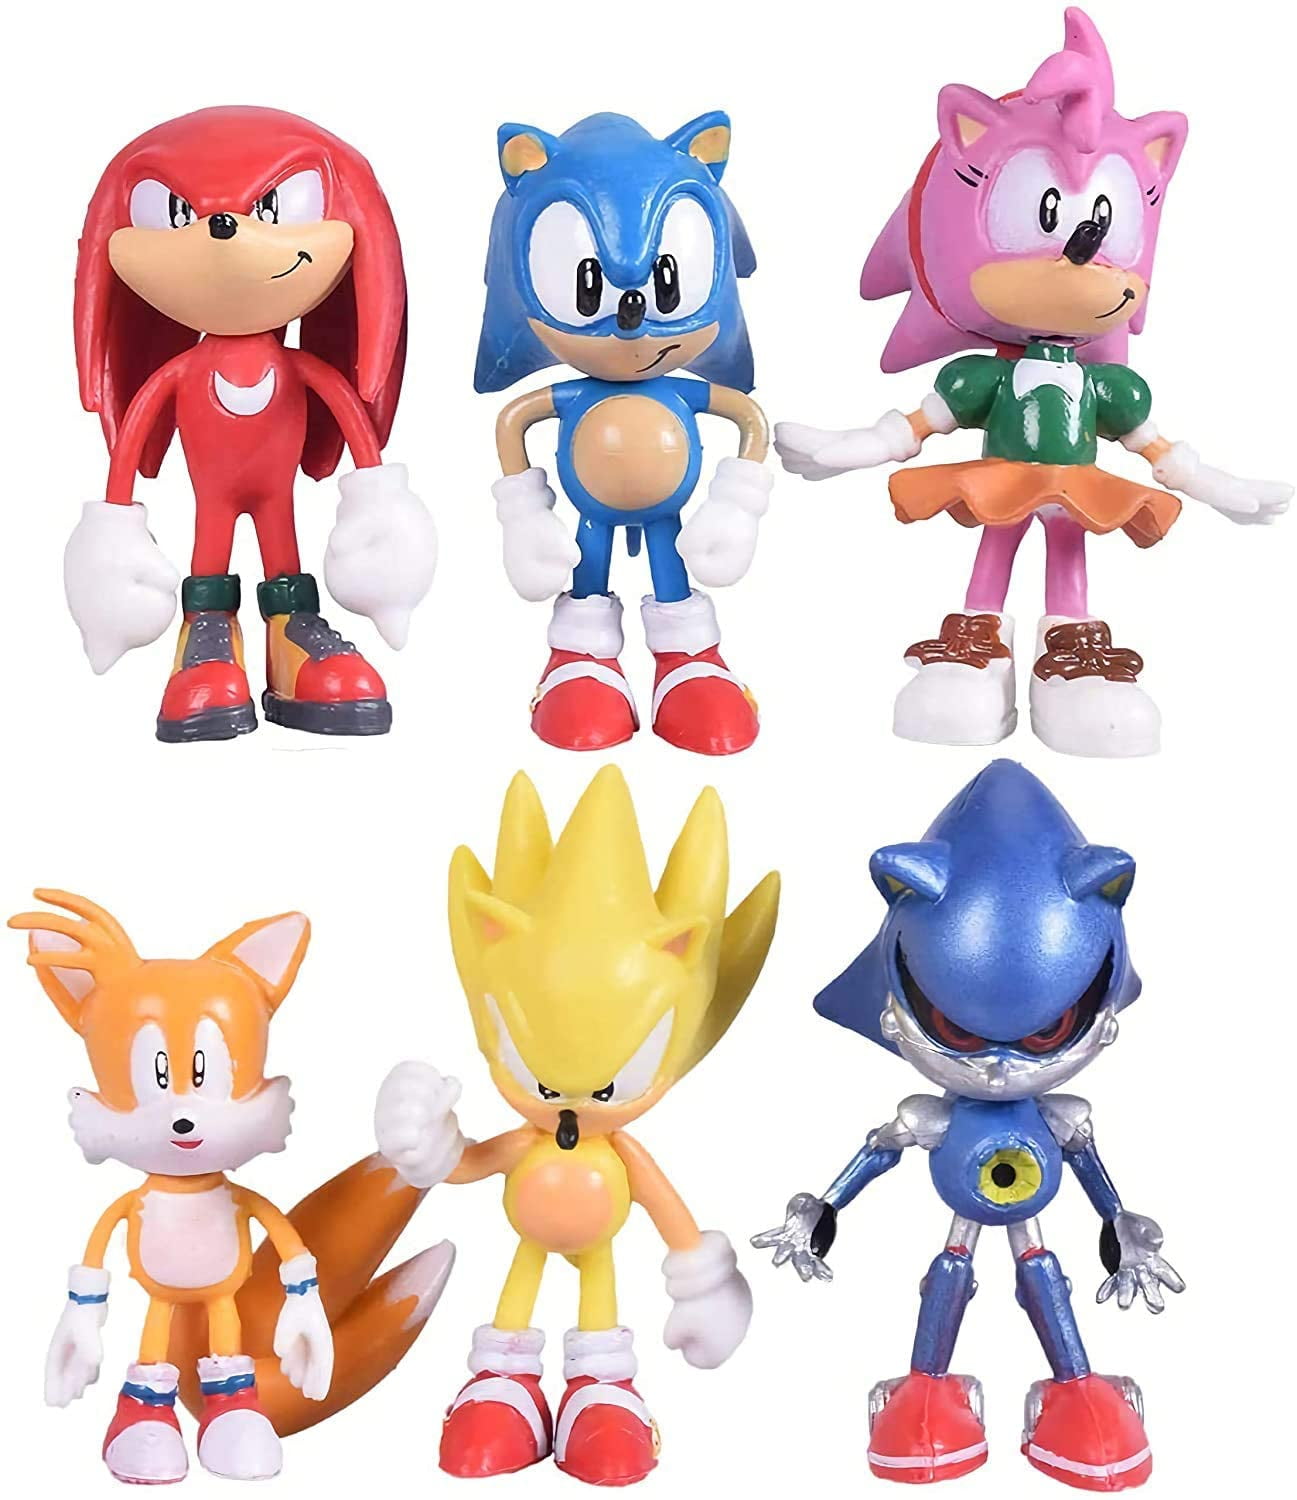 Decorations Ornaments Christmas Decorations 7 Pcs Sonic The Hedgehog Toys Figures with Base,The Action Figures Cake Toppers,Toys Birthday Gift Set Collectibles 